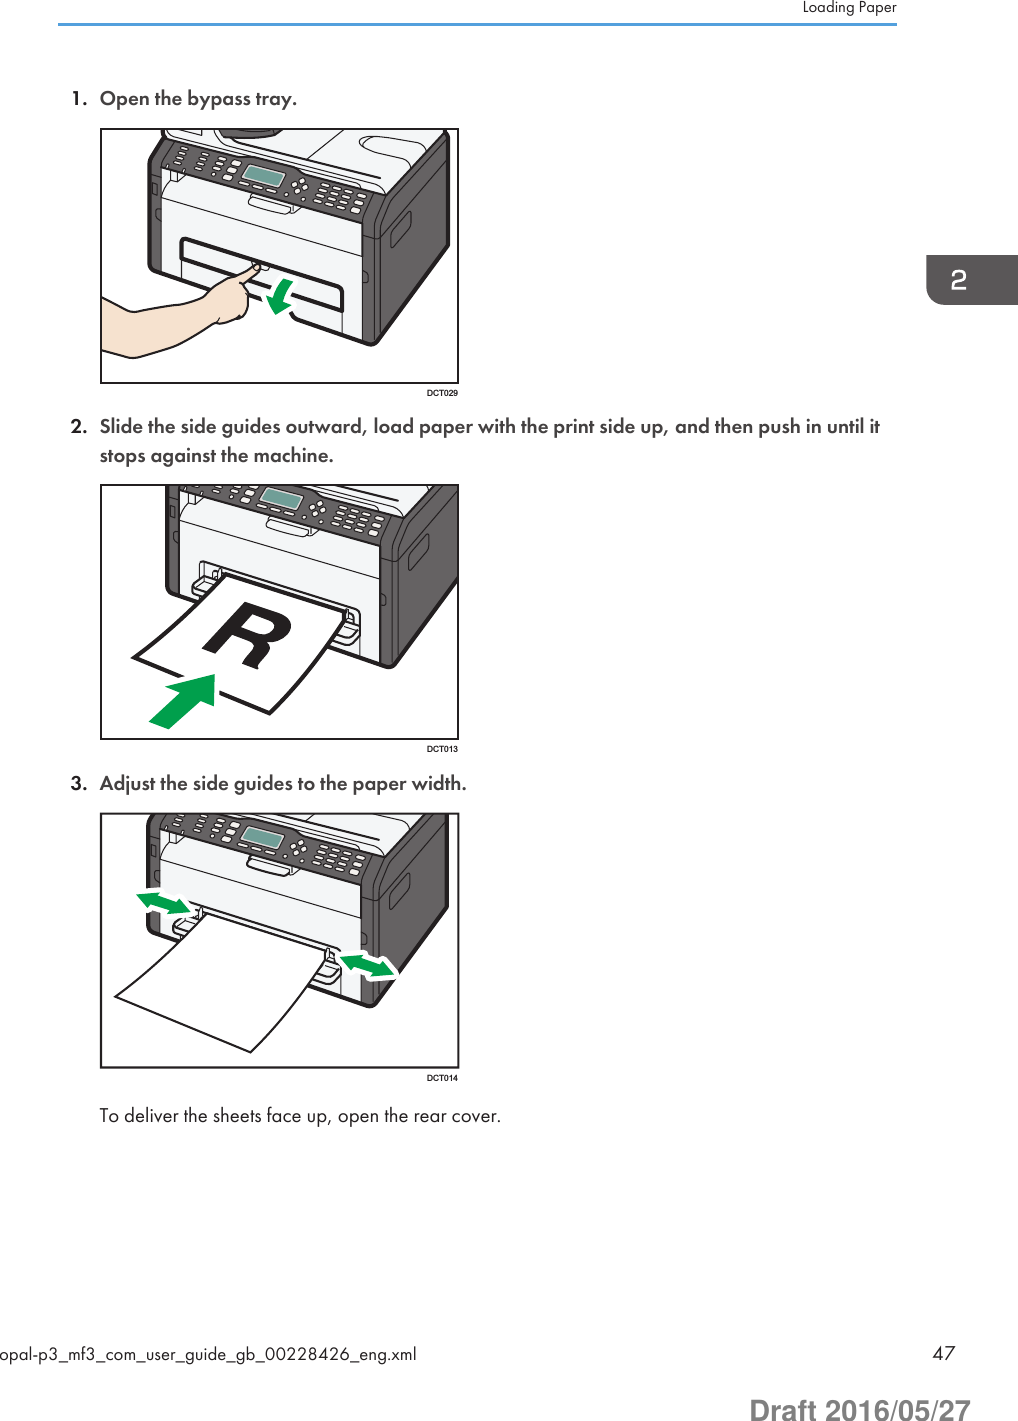 1. Open the bypass tray.DCT0292. Slide the side guides outward, load paper with the print side up, and then push in until itstops against the machine.DCT0133. Adjust the side guides to the paper width.DCT014To deliver the sheets face up, open the rear cover.Loading Paperopal-p3_mf3_com_user_guide_gb_00228426_eng.xml 47Draft 2016/05/27